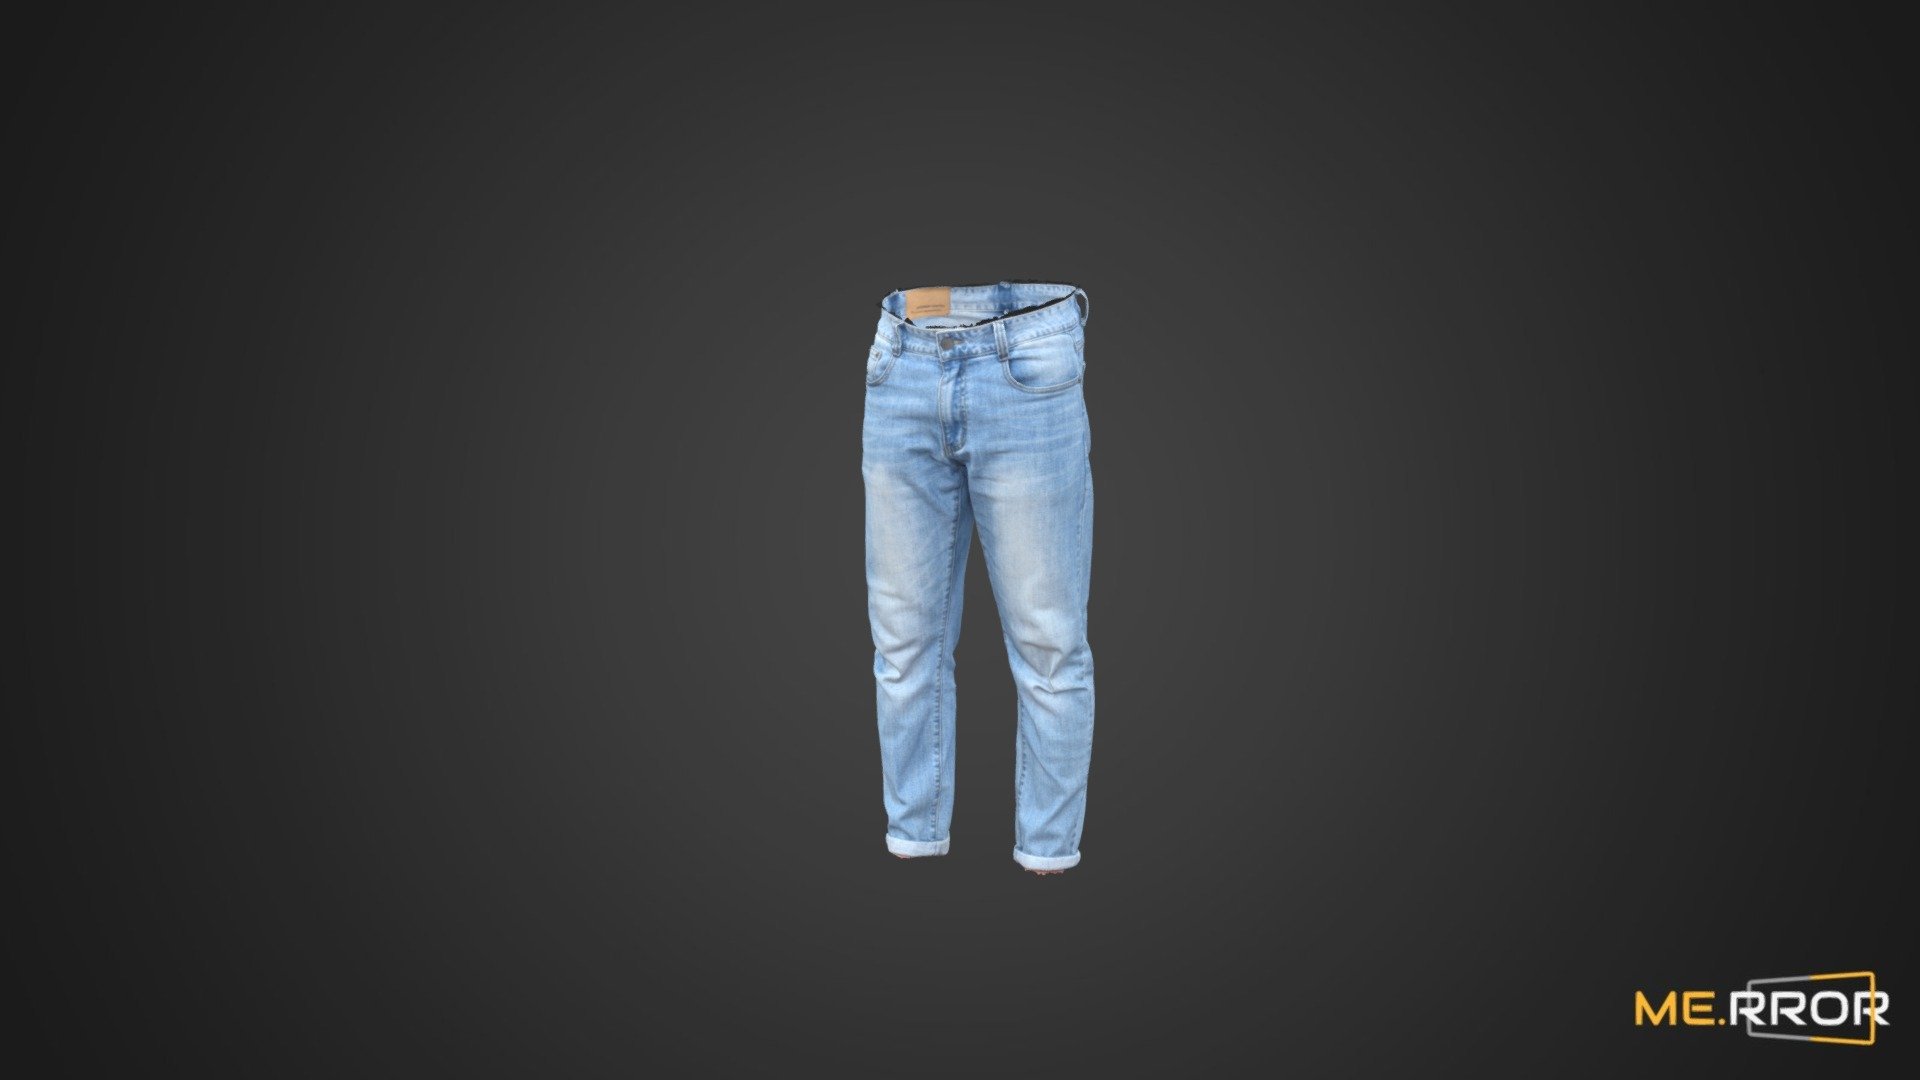 MERROR is a 3D Content PLATFORM which introduces various Asian assets to the 3D world


3DScanning #Photogrametry #ME.RROR - Male Jeans - Buy Royalty Free 3D model by ME.RROR (@merror) 3d model